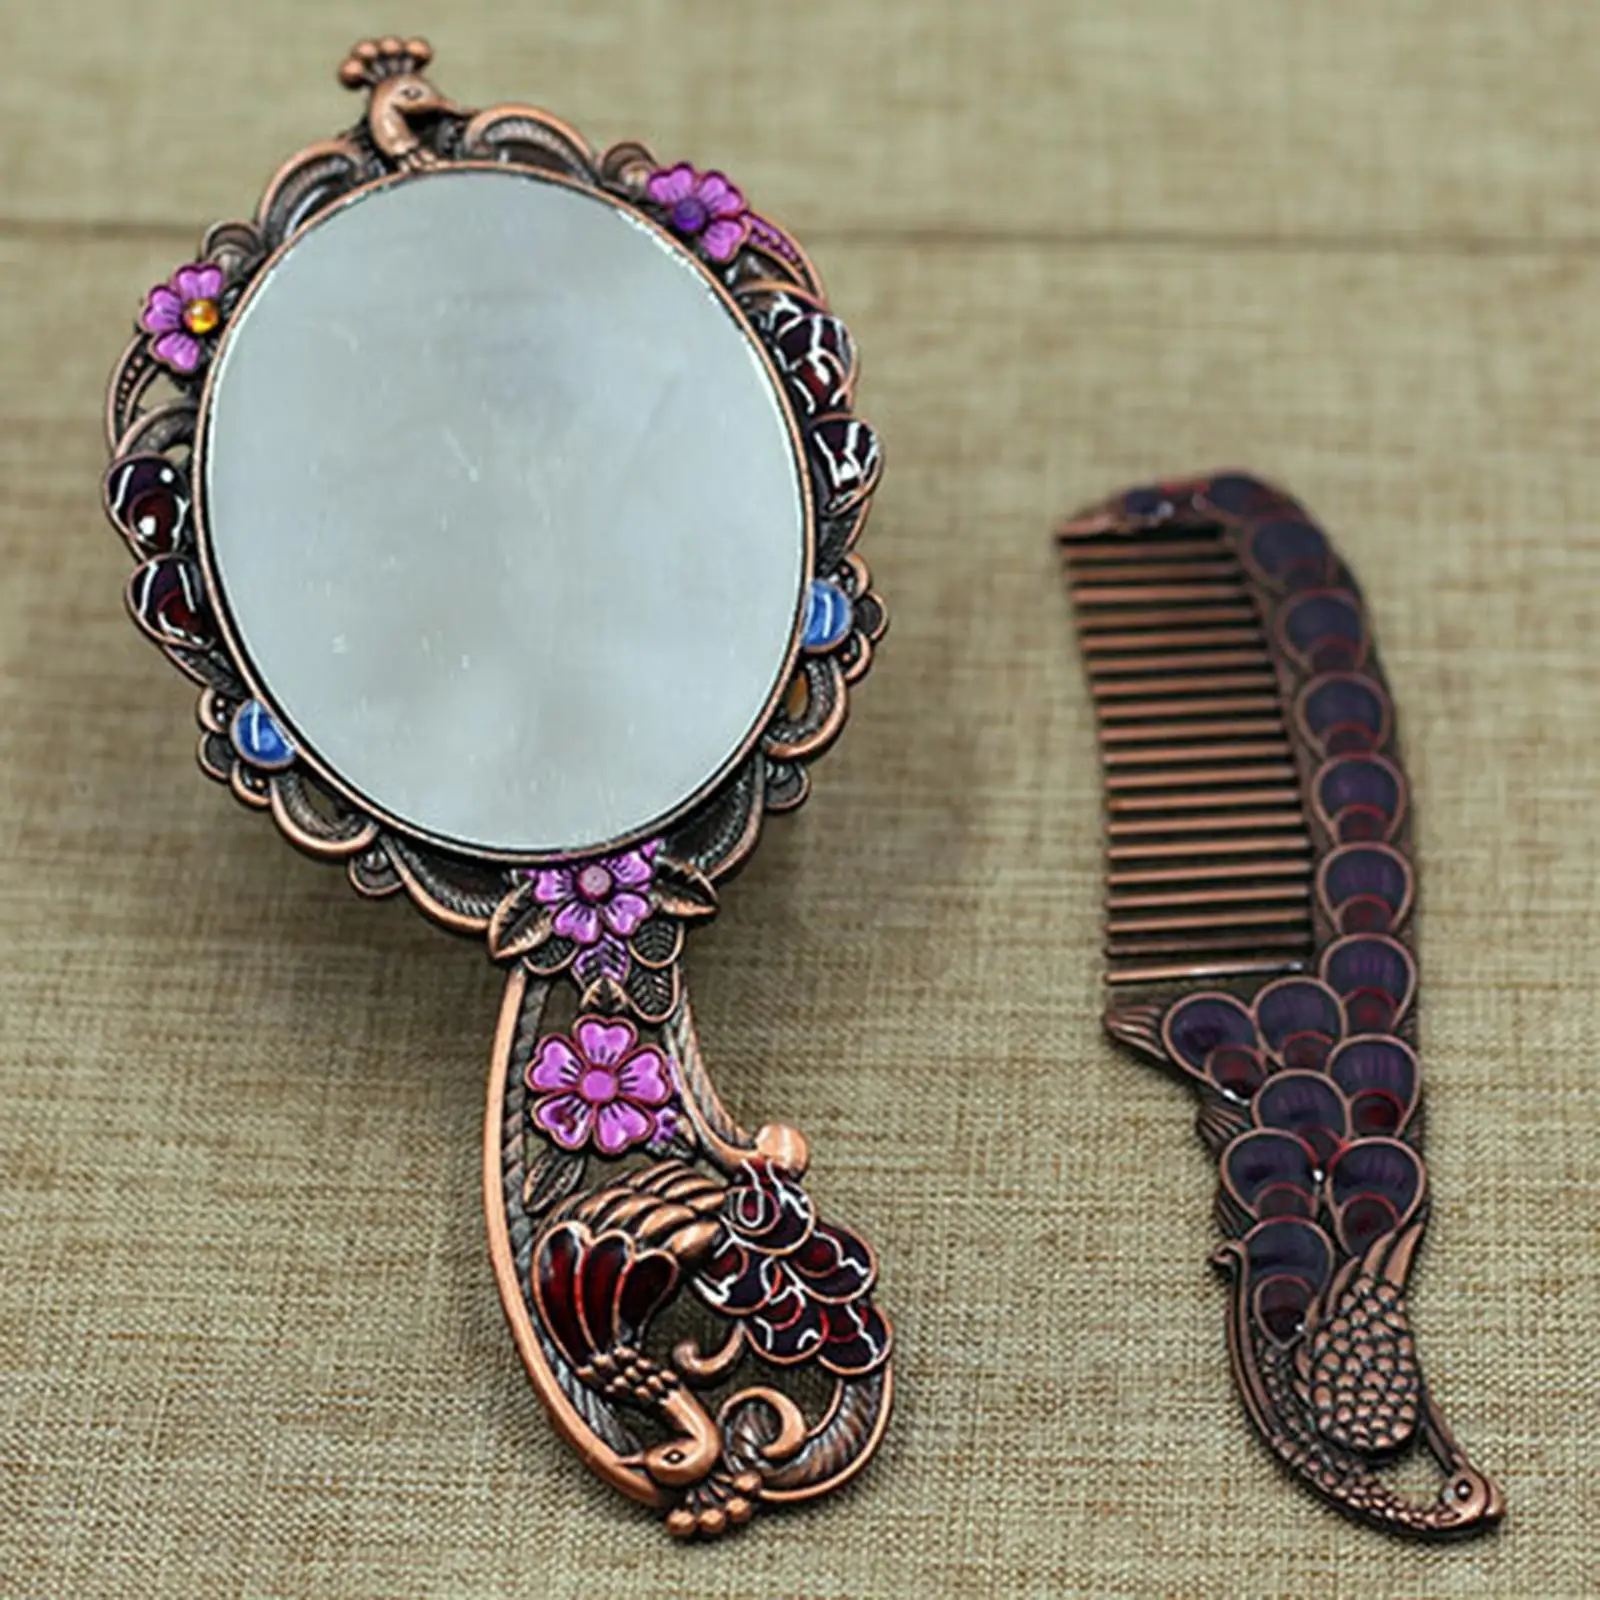 Spreading Tail Peacock Embossing Table Princess Mirror & Comb with Handle Brightly-Colored